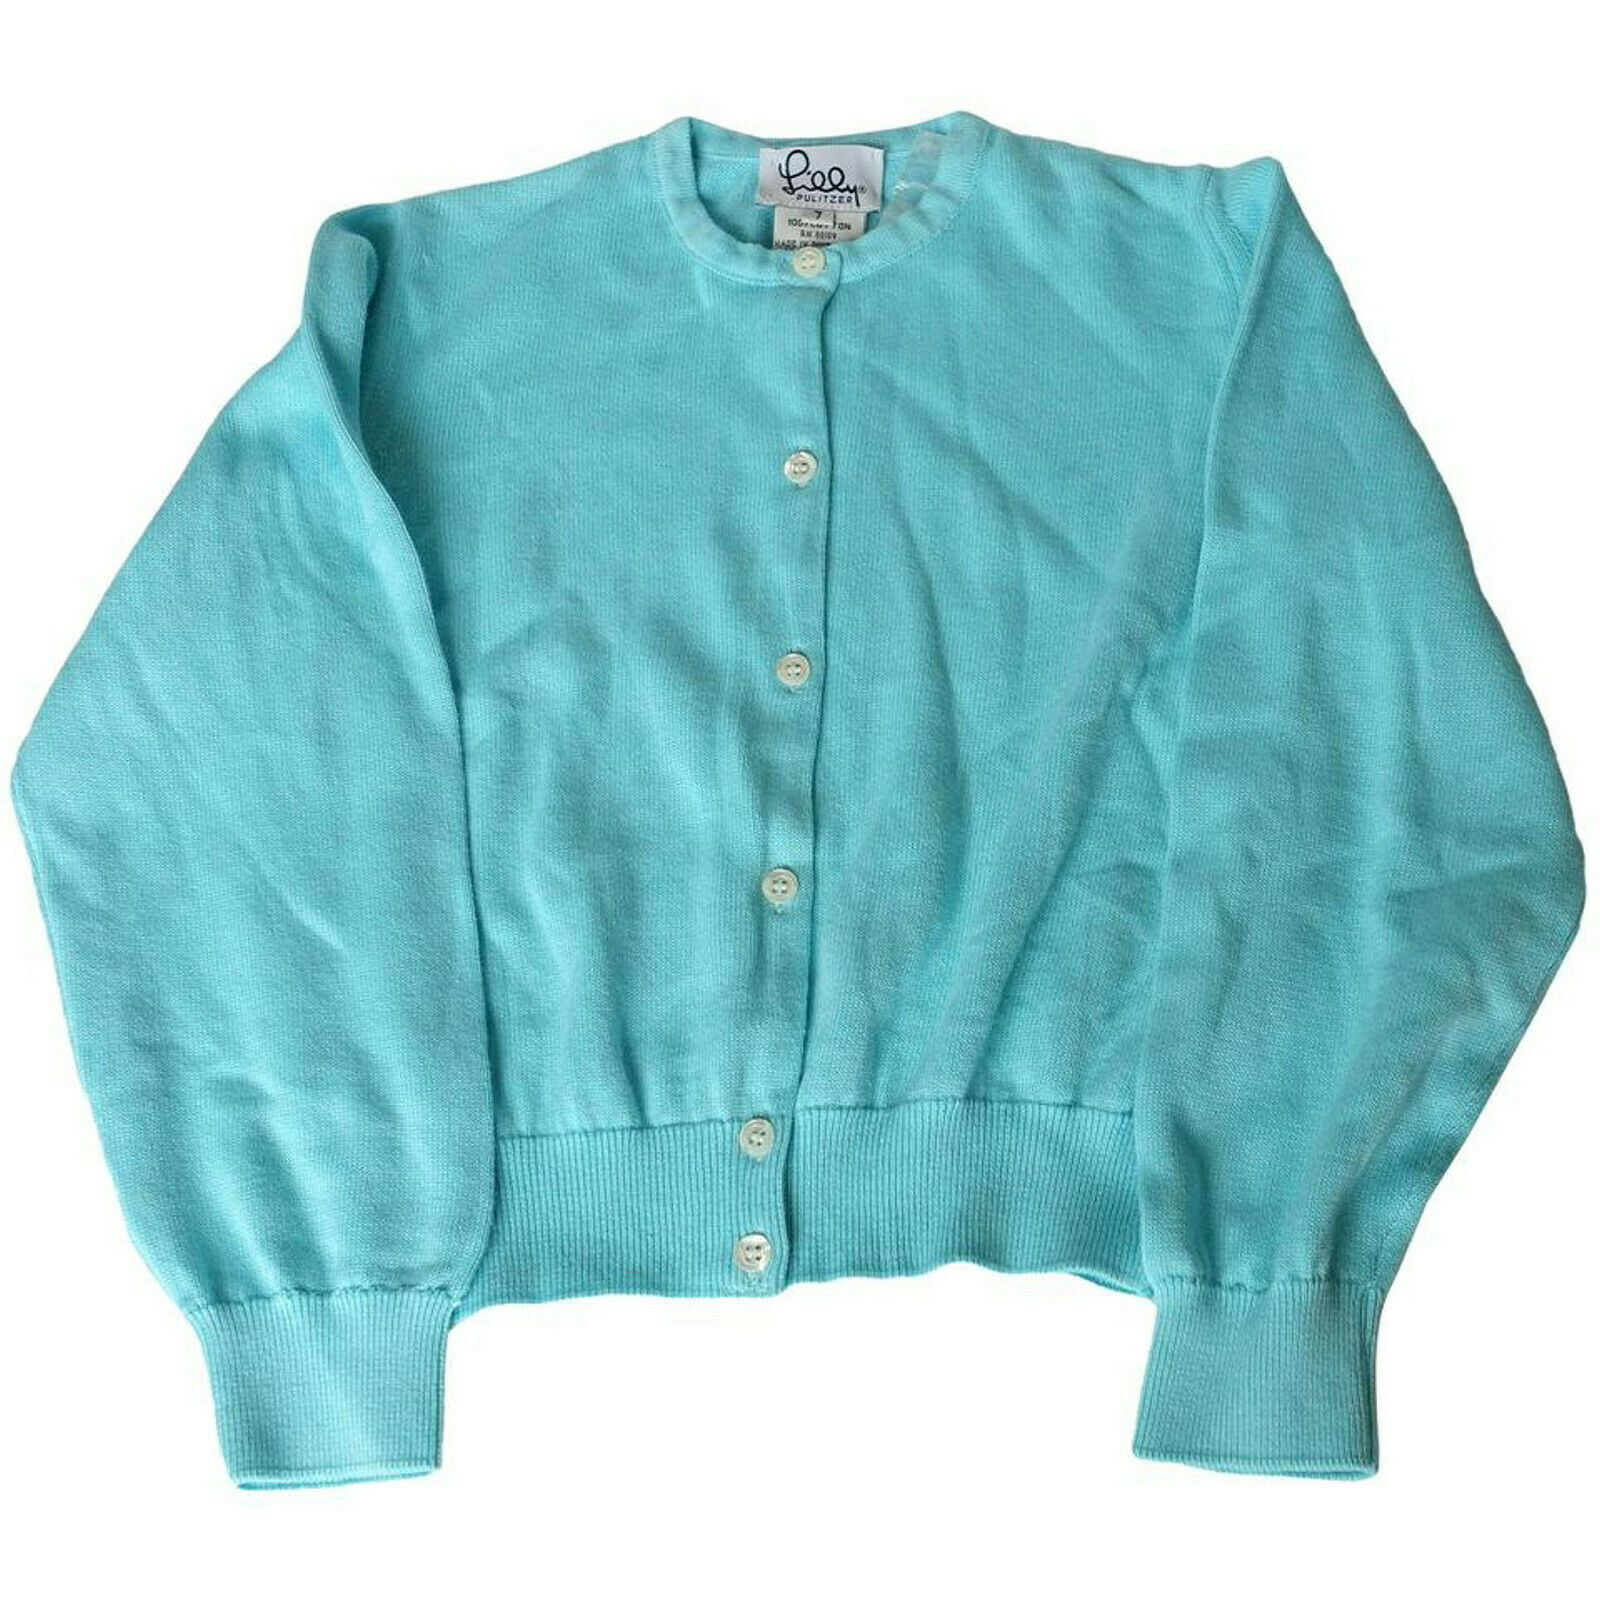 LILLY PULITZER Blue Cotton Knit Carrie Cardigan Sweater Girls 7 - $29.99